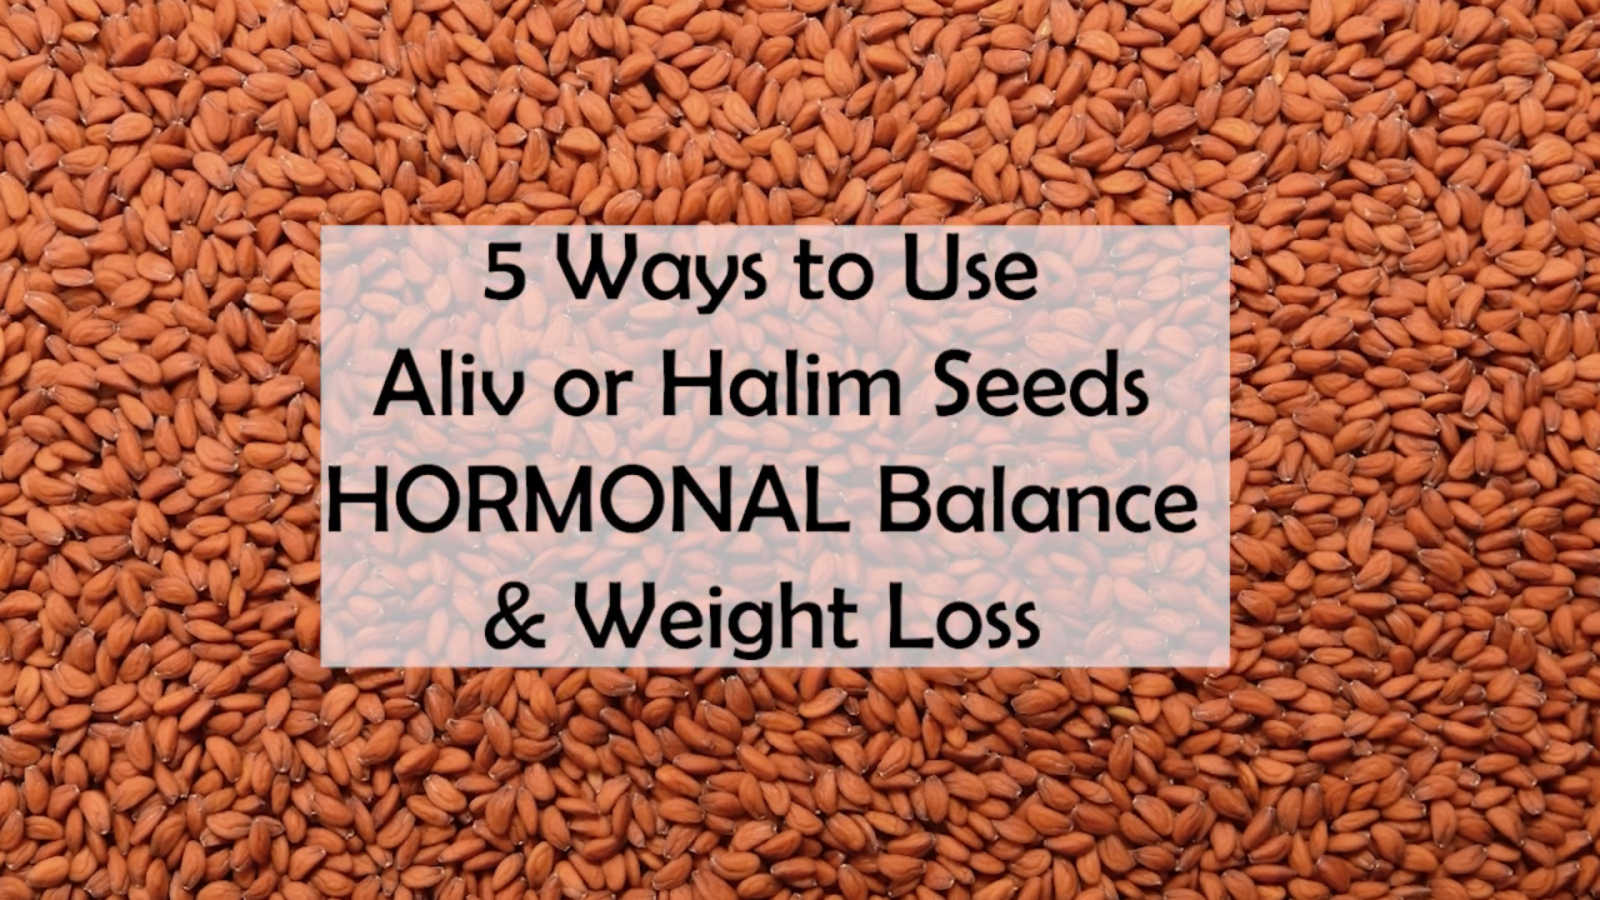 5 Ways to Use Aliv / Halim Seeds for Hormonal Balance & Weight loss. - Food  Fitness & Fun